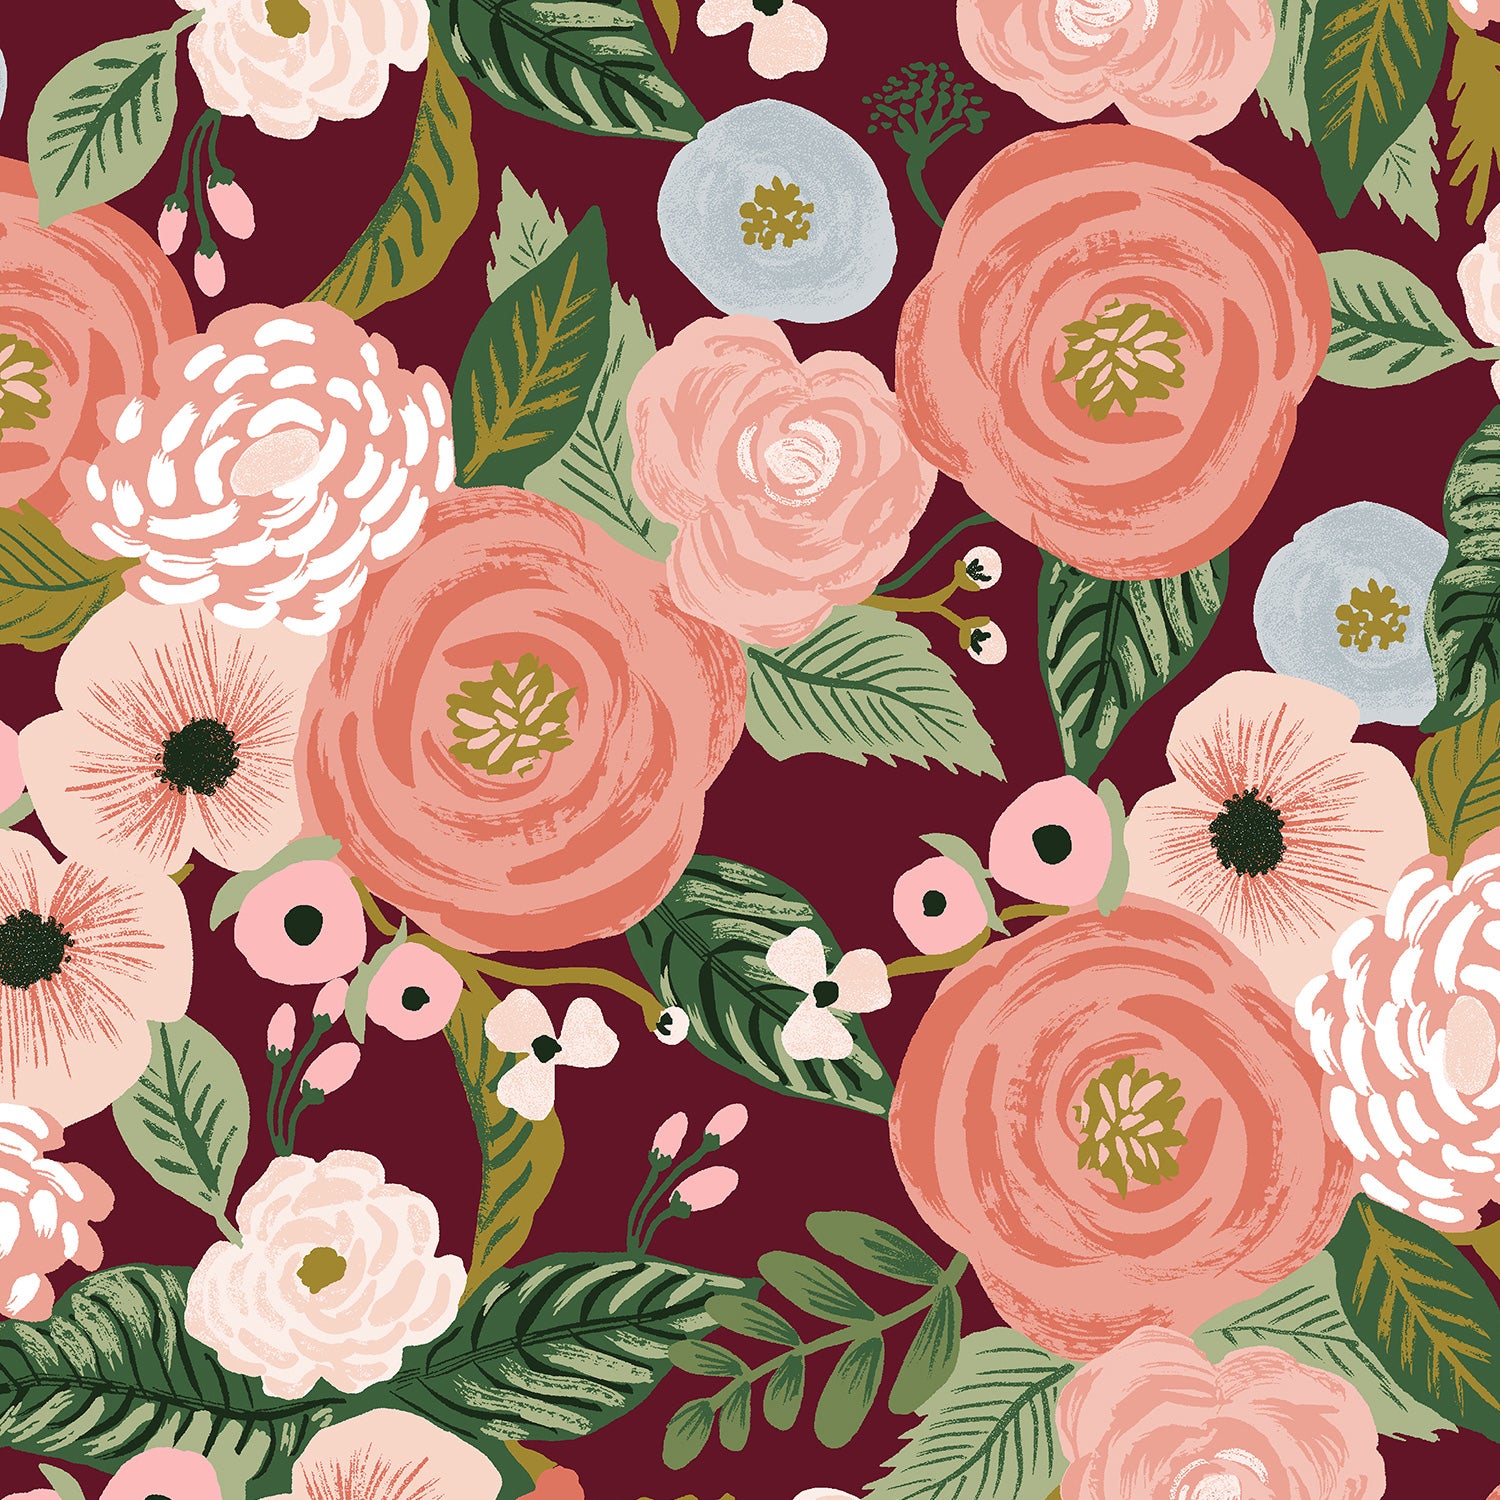 Garden Party, Juliet Rose in Burgundy Canvas by Rifle Paper Co